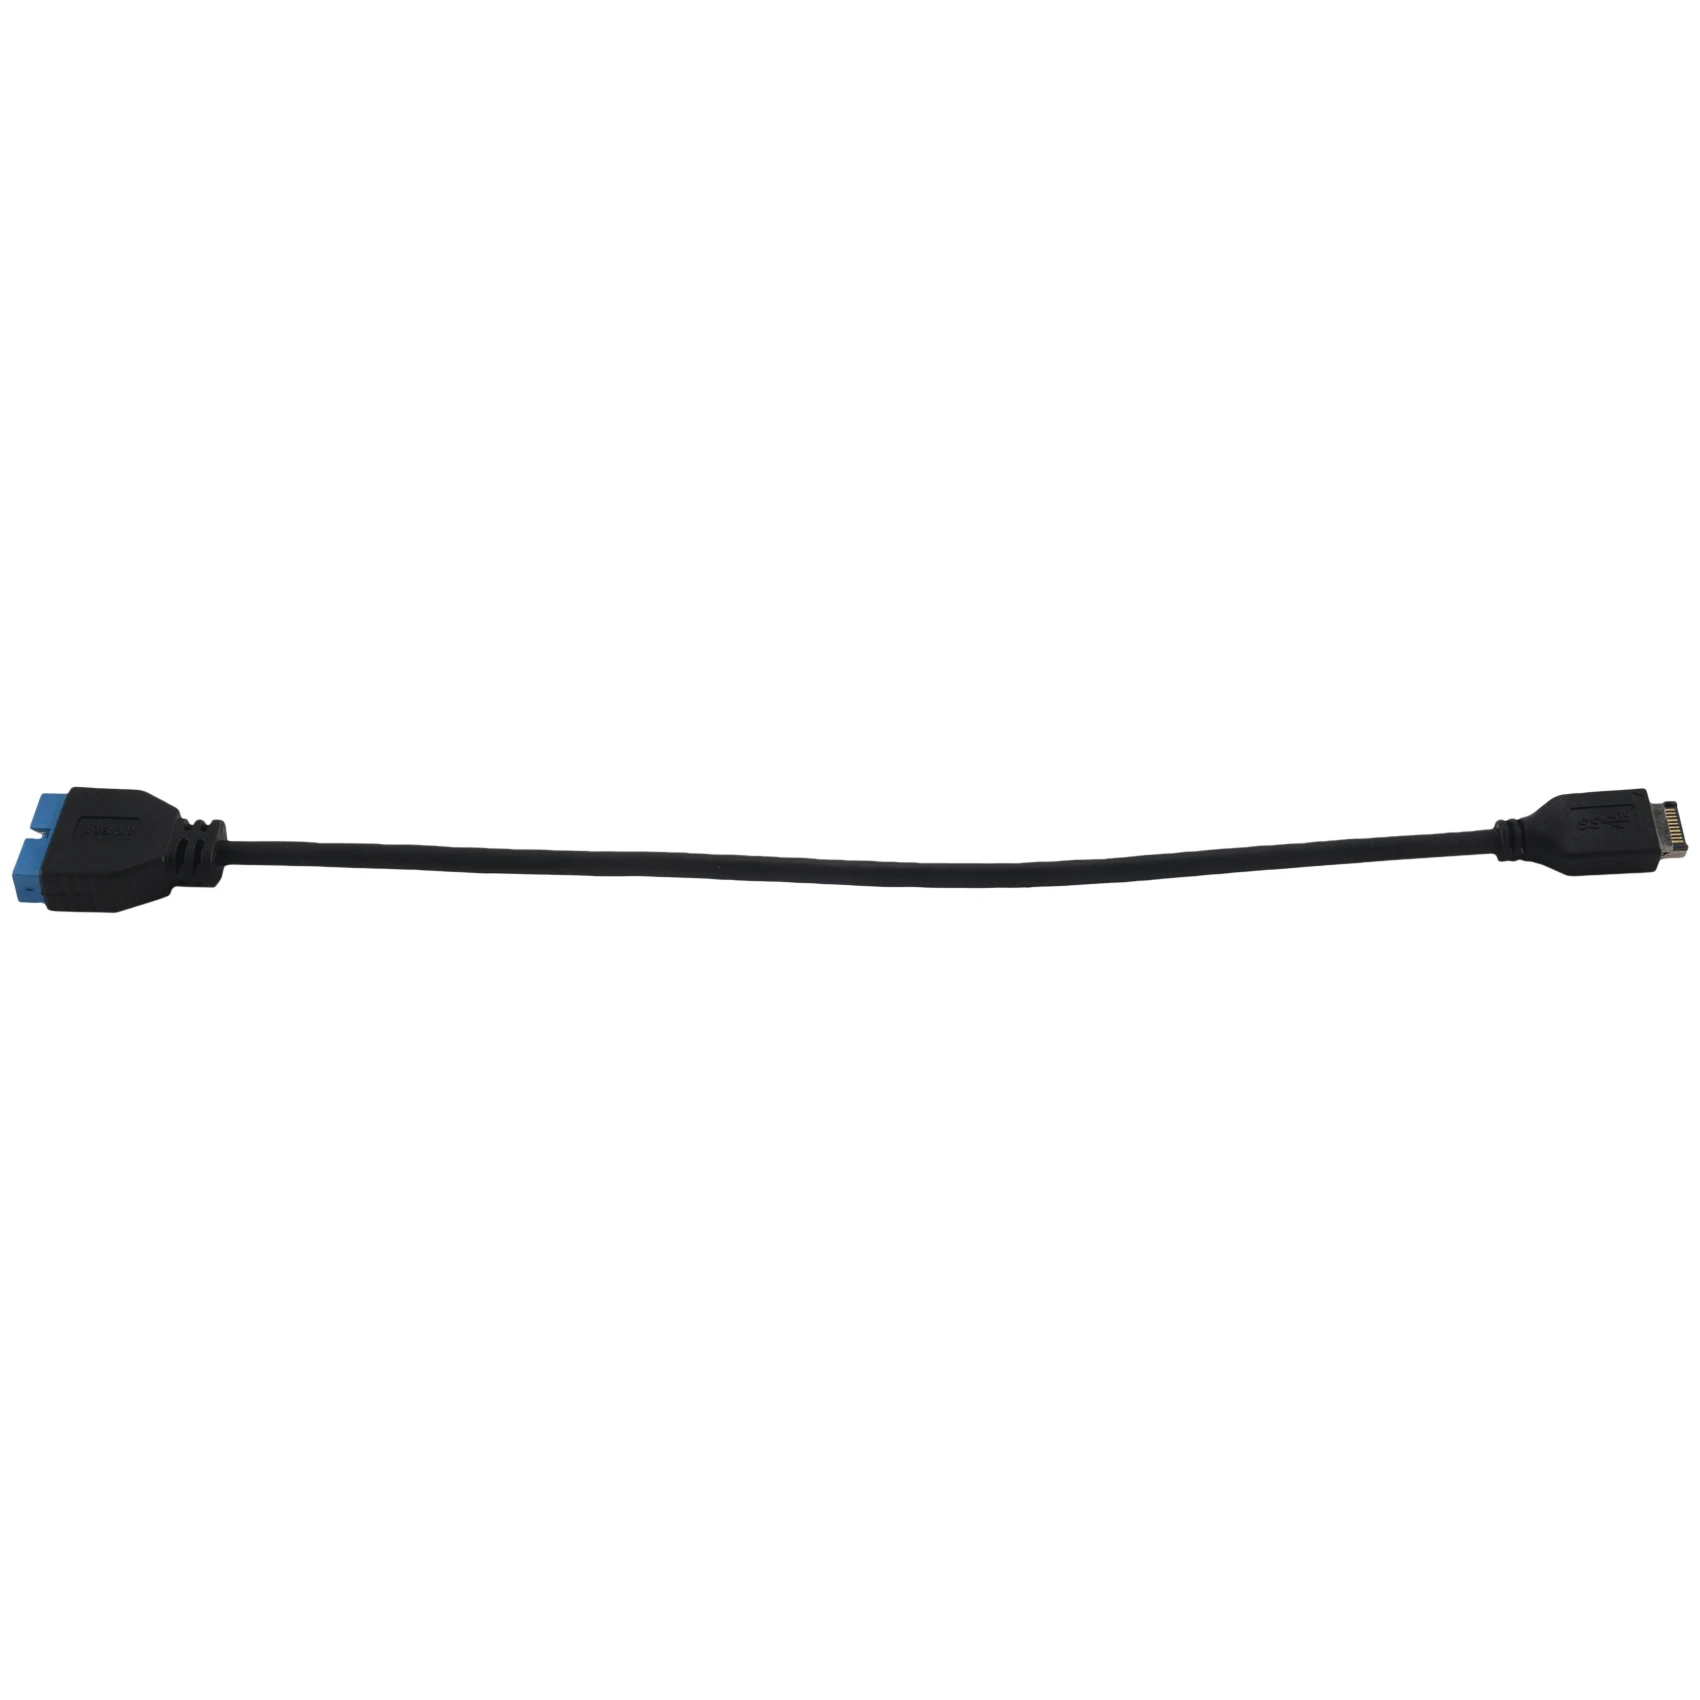 

USB 3.1 Front Panel Header to USB 3.0 20Pin Header Extension Cable for ASUS Motherboard 20cm